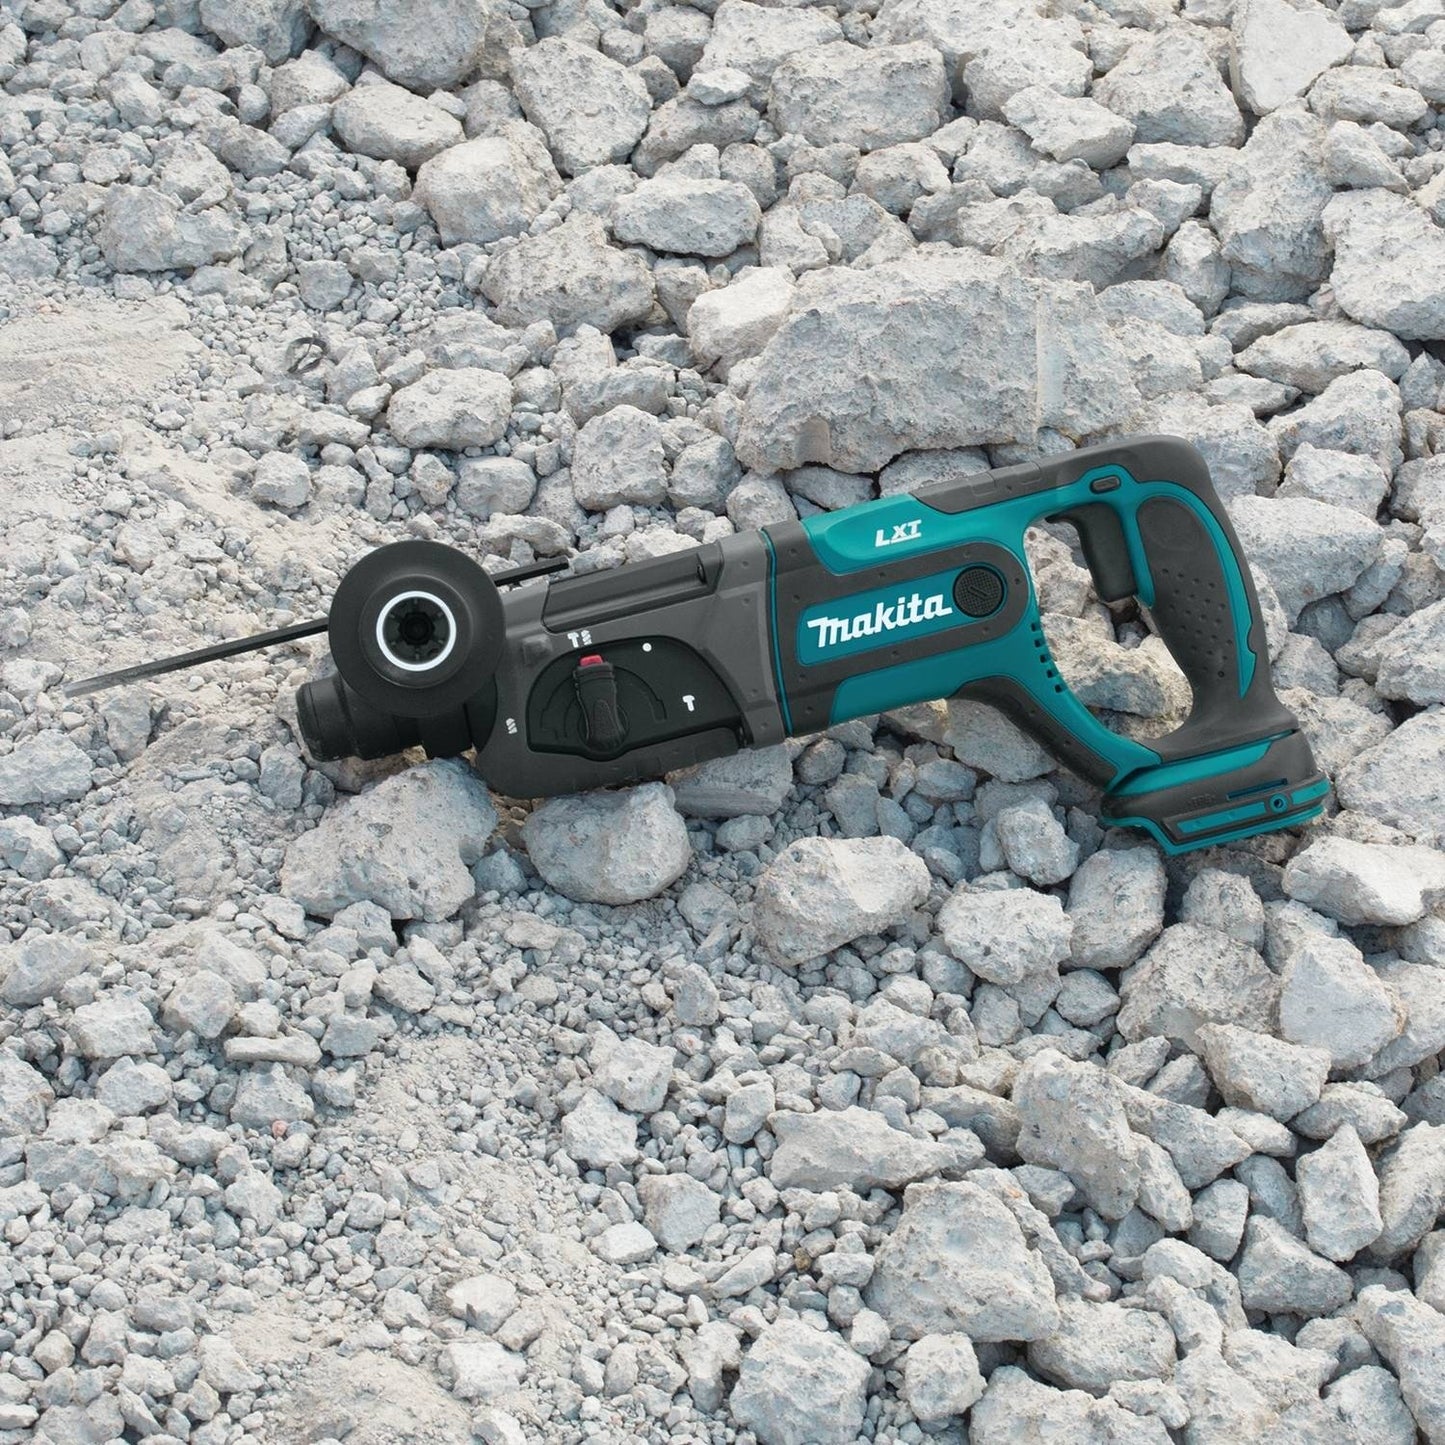 Makita XRH04Z 18V LXT® Lithium-Ion Cordless 7/8" Rotary Hammer, accepts SDS-PLUS bits, Tool Only